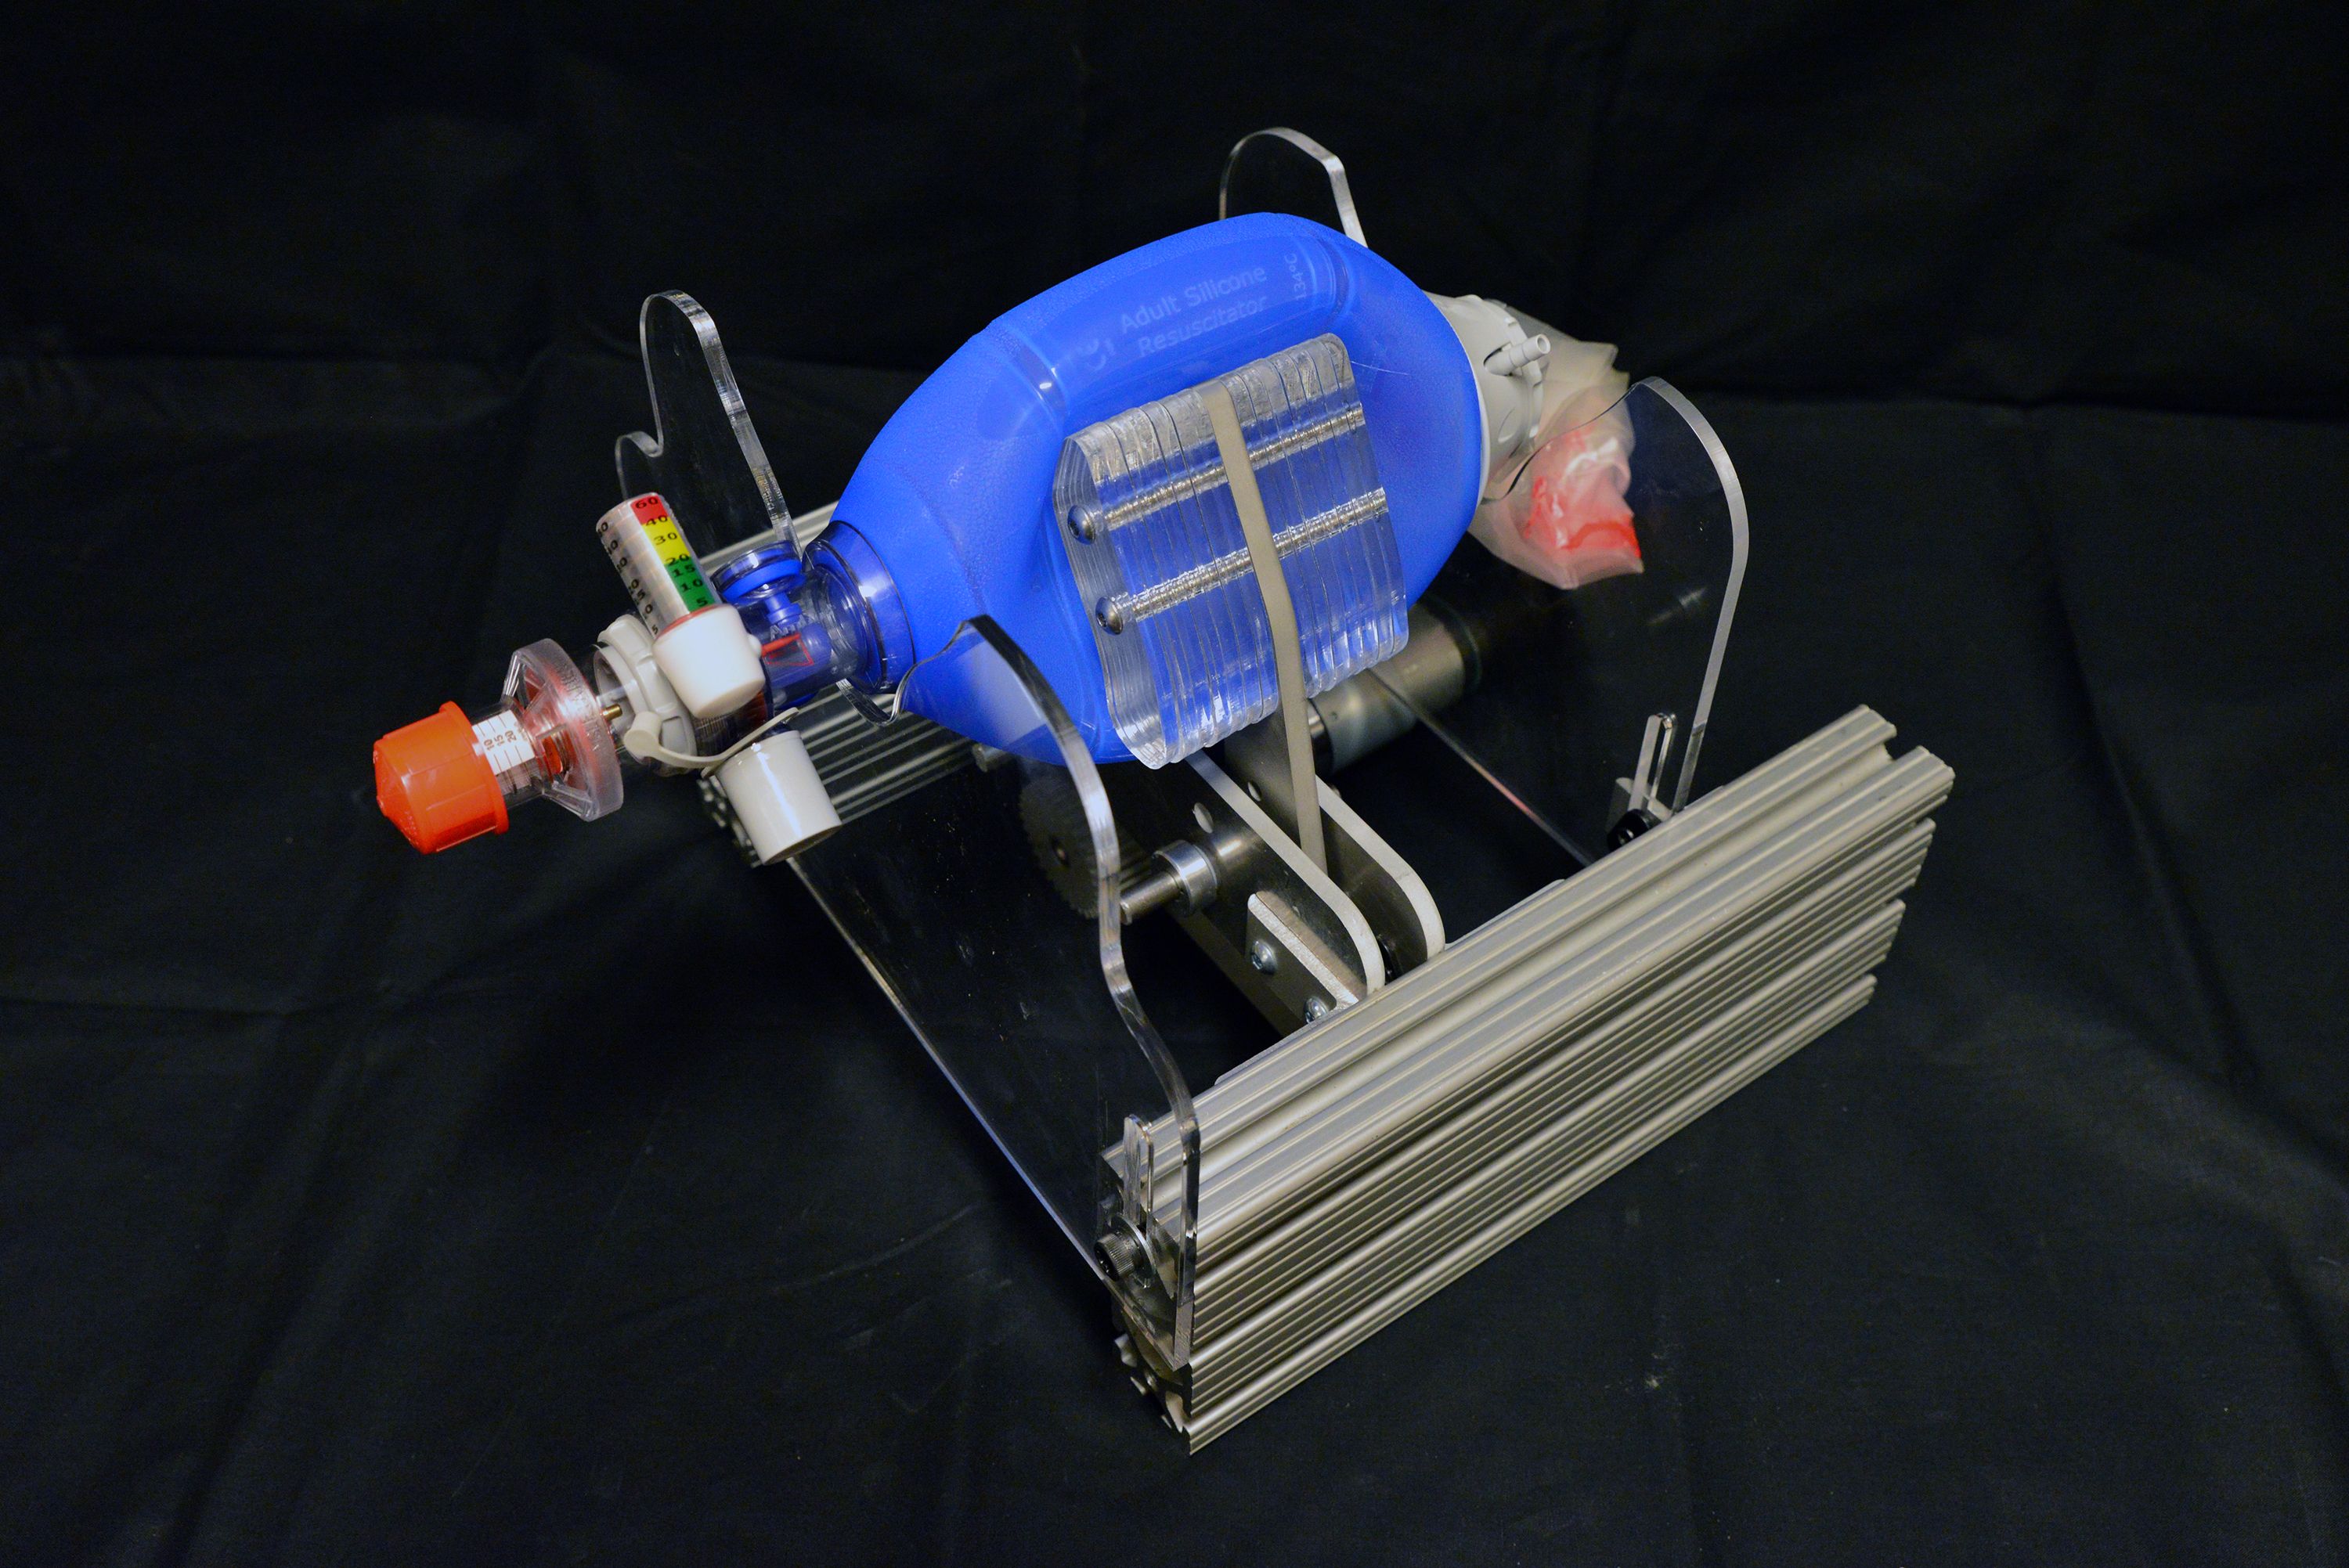 MIT-based team works on rapid deployment of open-source, low-cost ventilator, MIT News